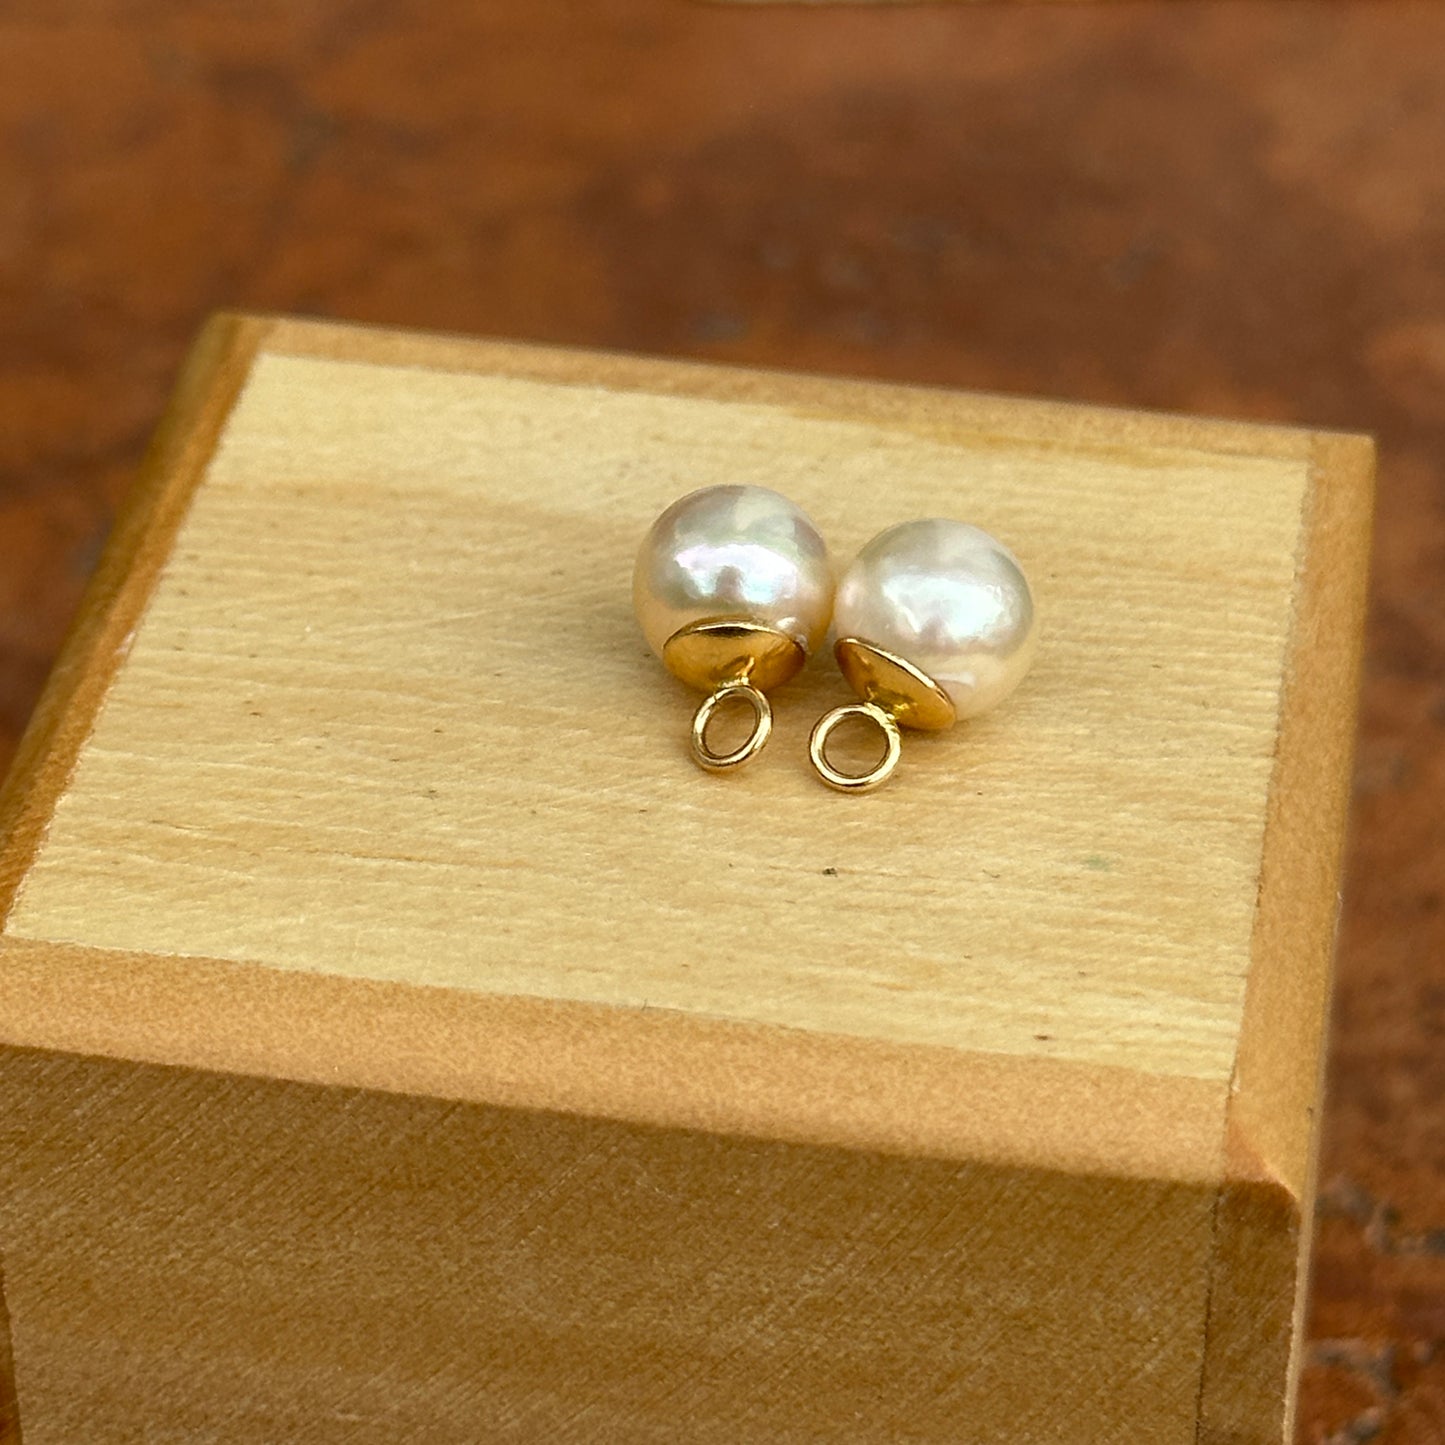 Estate 14KT Yellow Gold Mini White Pearl Earring Charms